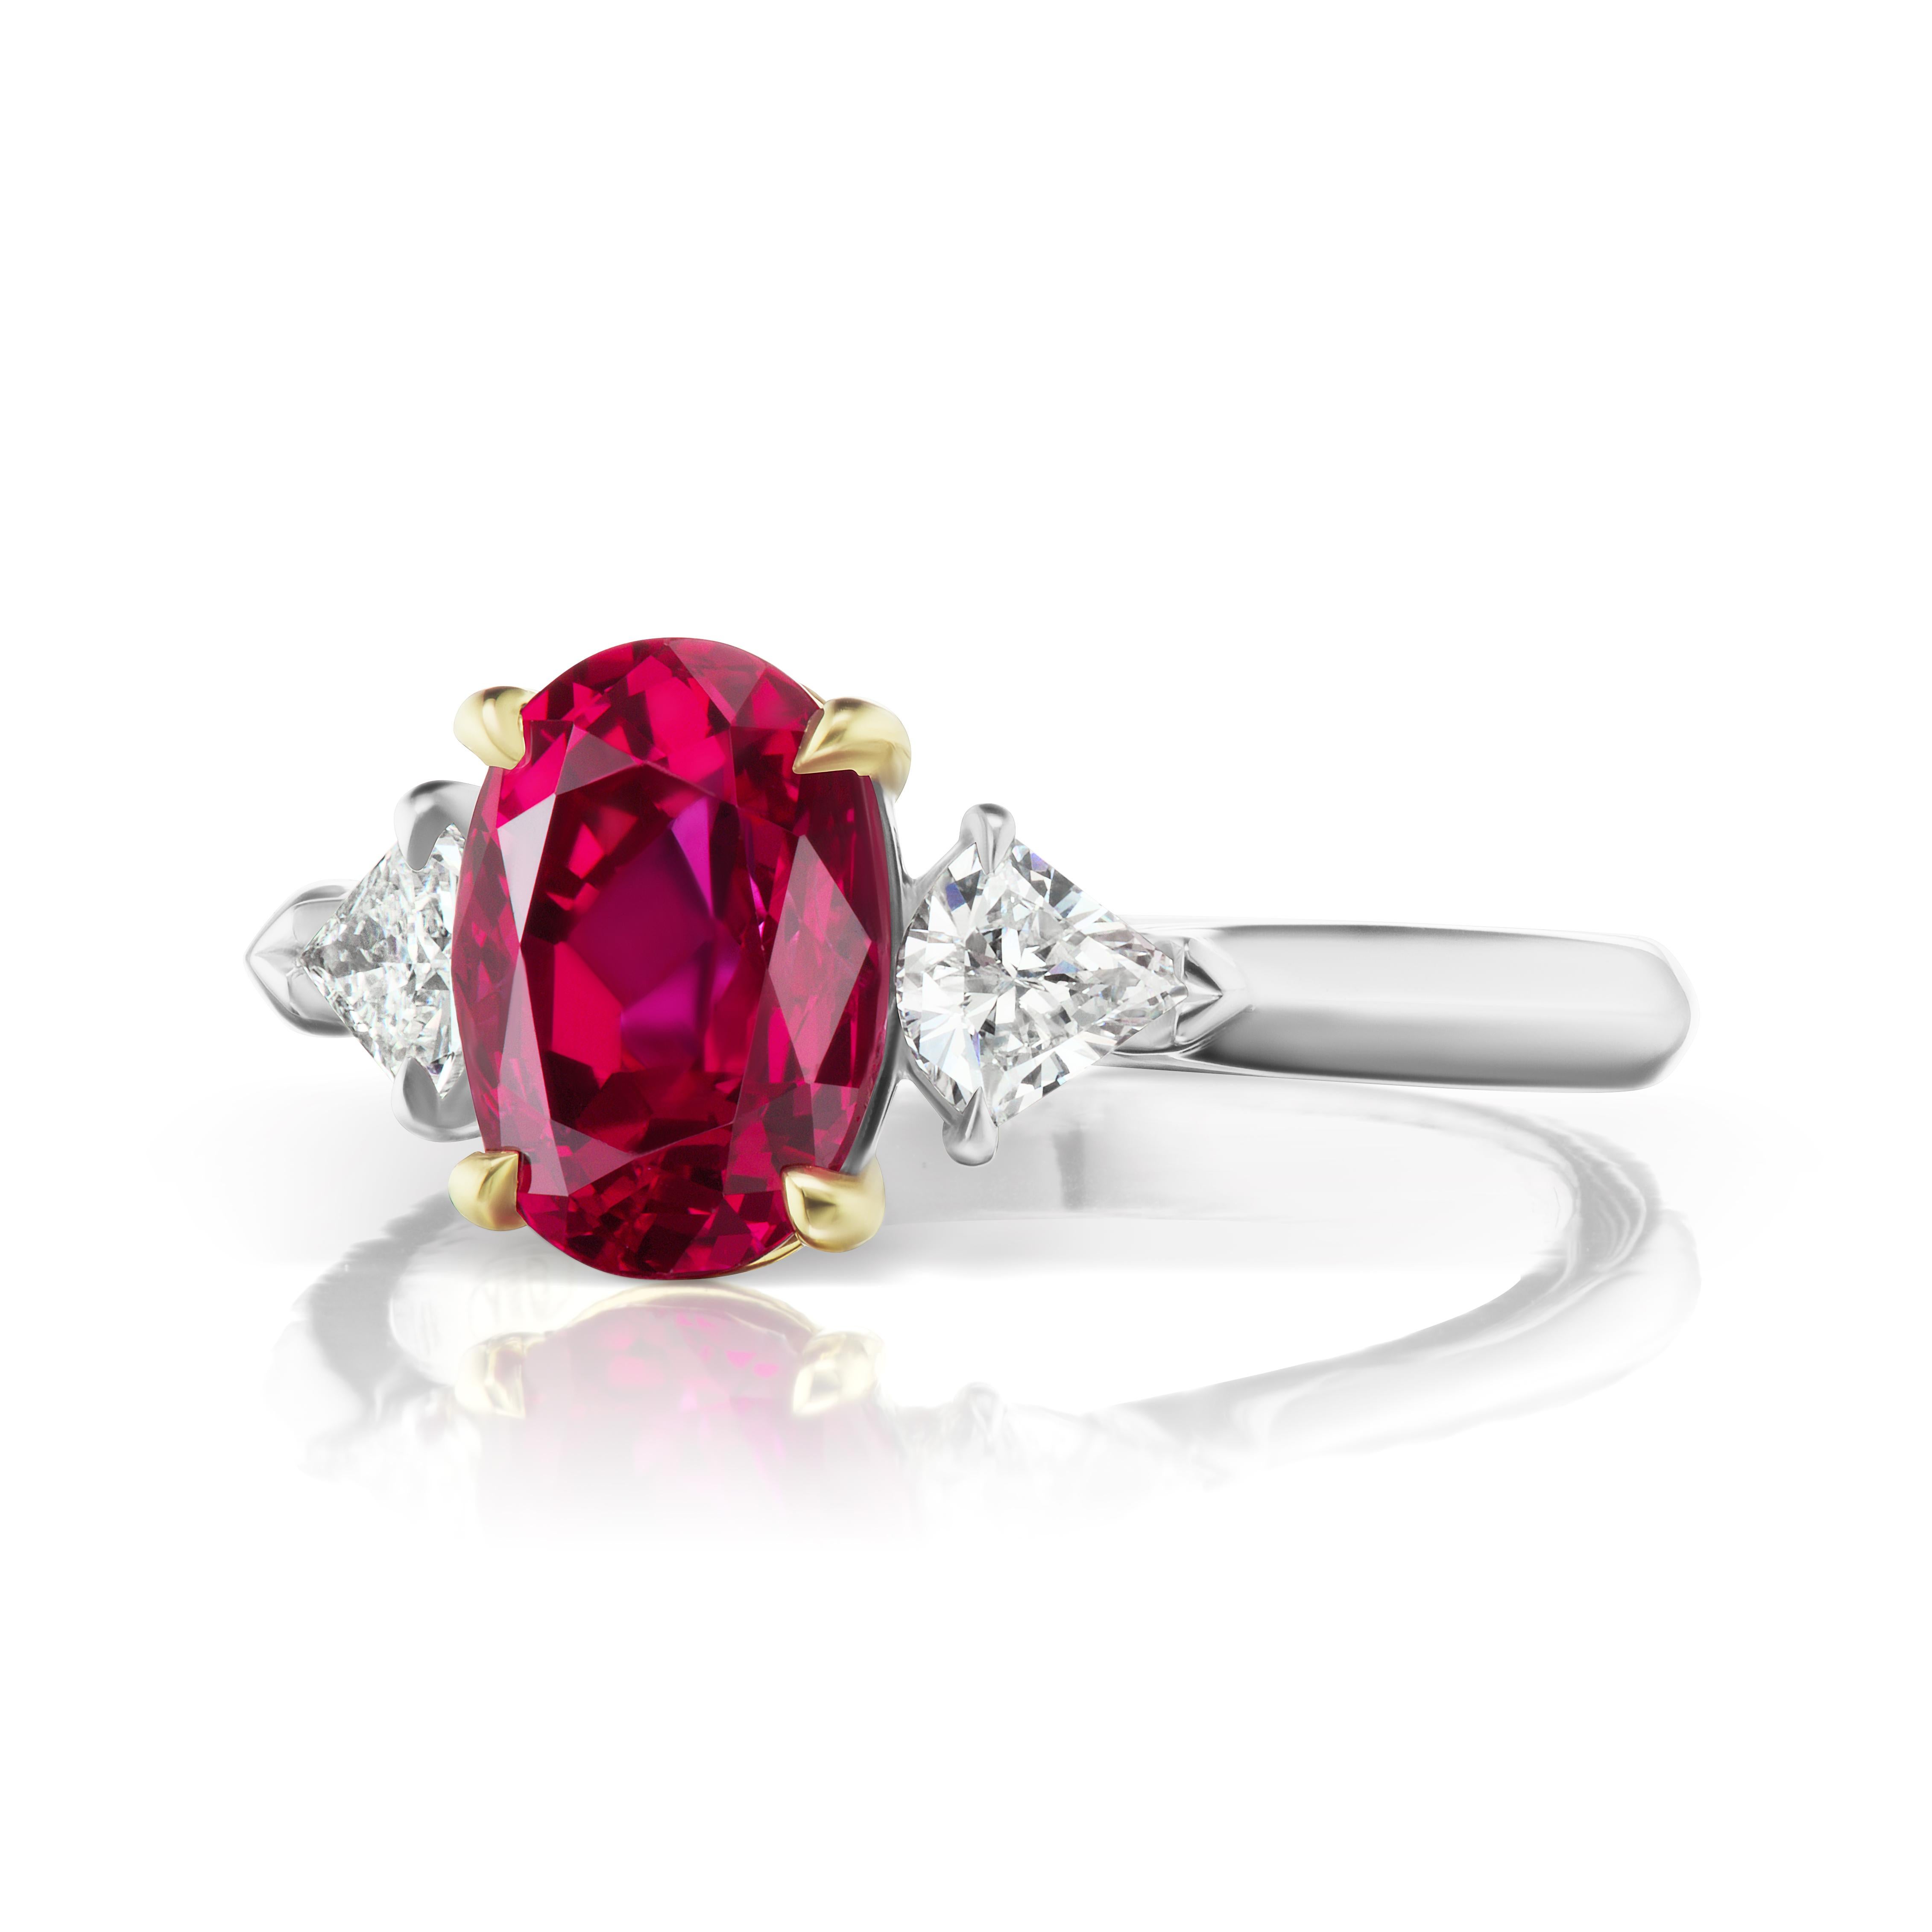 Contemporary 2.49 Carat Conflict Free Oval Ruby GIA Certified from Thailand Set with Kites For Sale